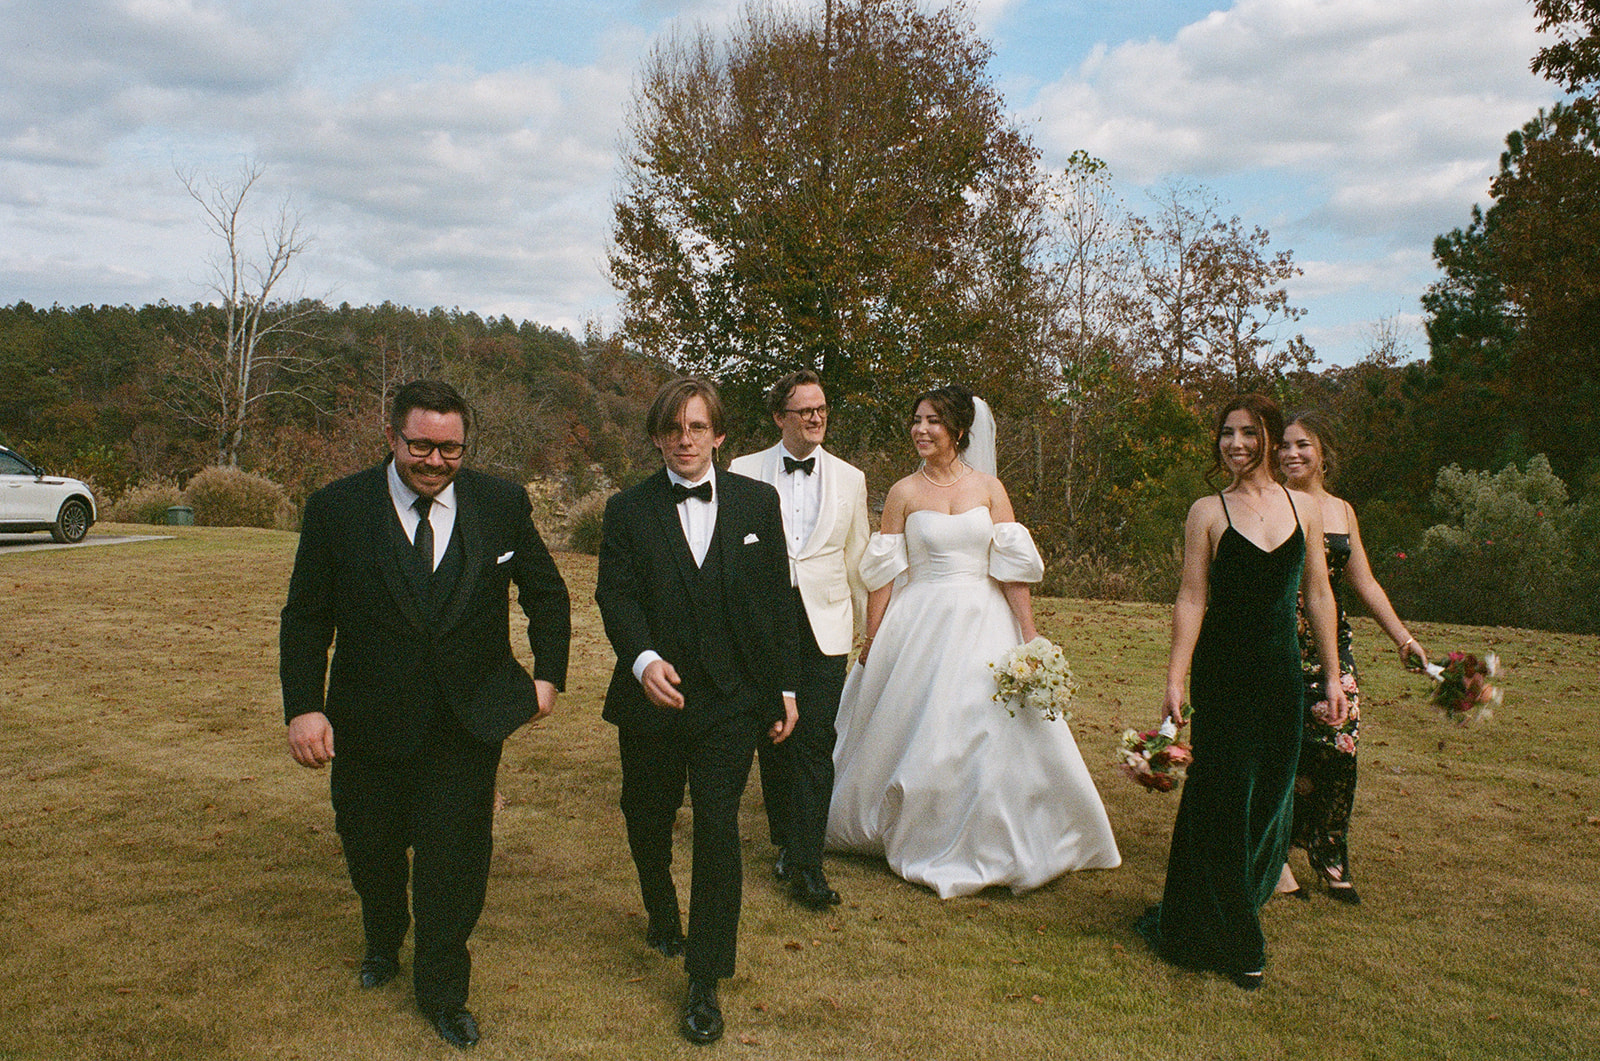 A couple walks with their bridal party during wedding day at The Barn at Smith Lake in Alabama